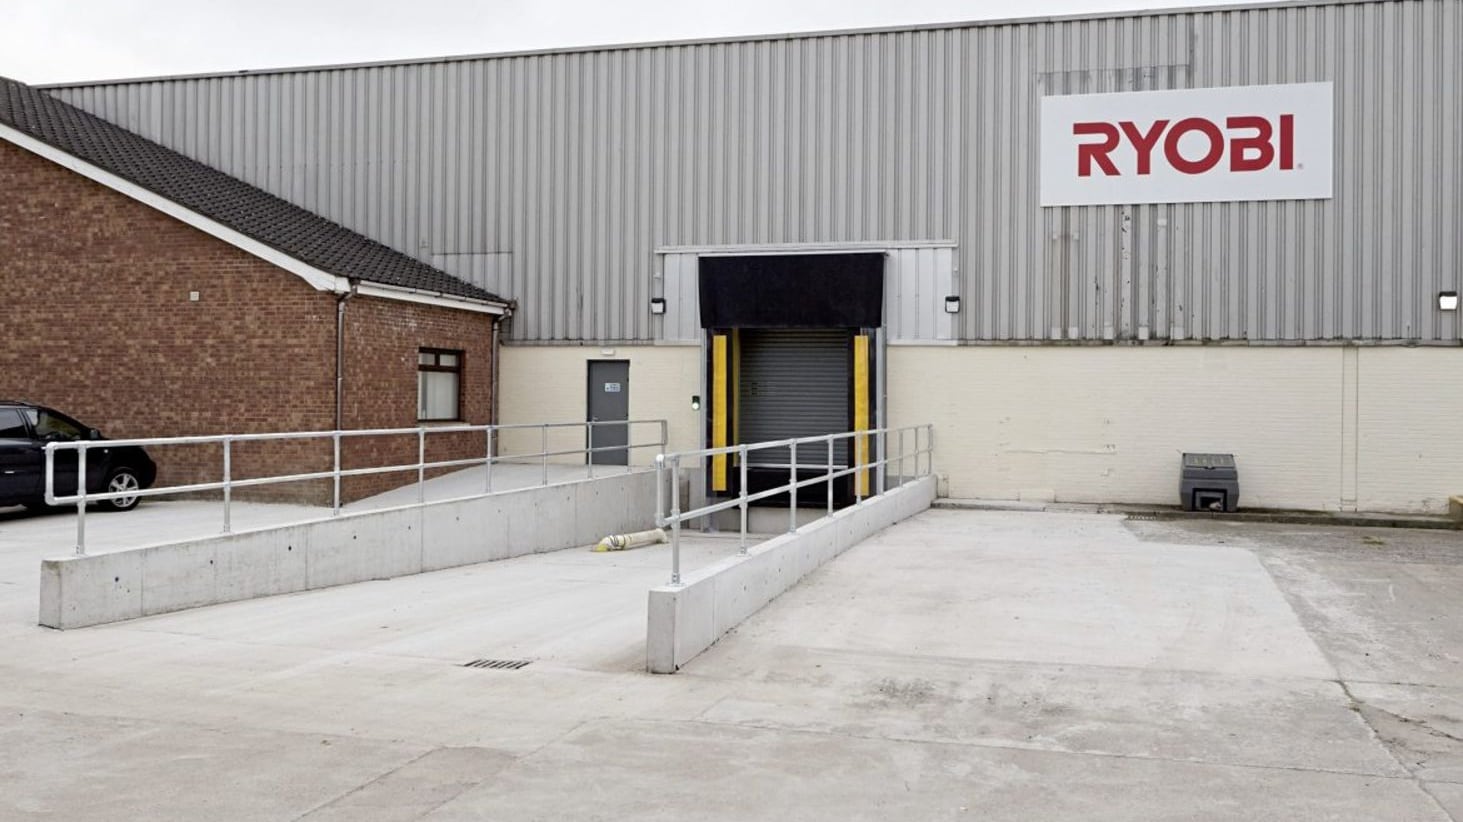 Ryobi expanded into additional space at Kilroot Business Park last year, with the company&#39;s presence now totalling around 78,000 sq ft. 